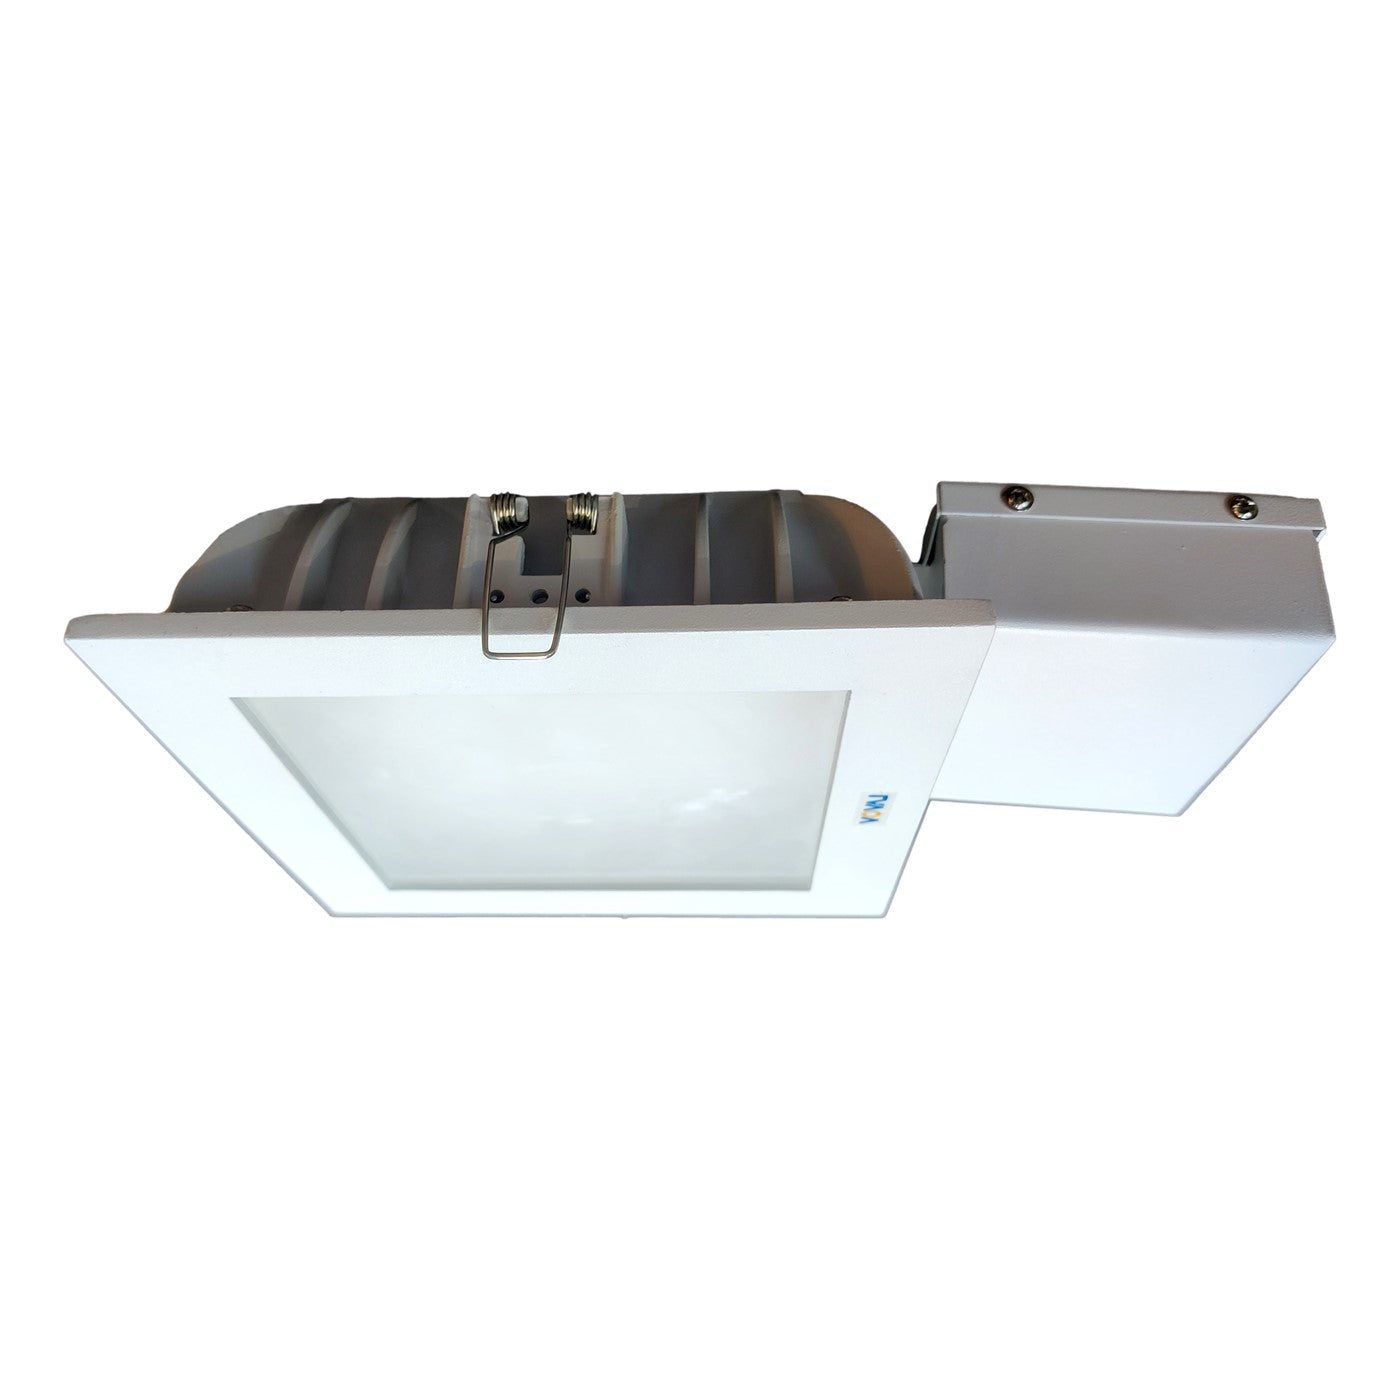 Lavov LV-960-6 inches-15W-Square-WH Led Downlight